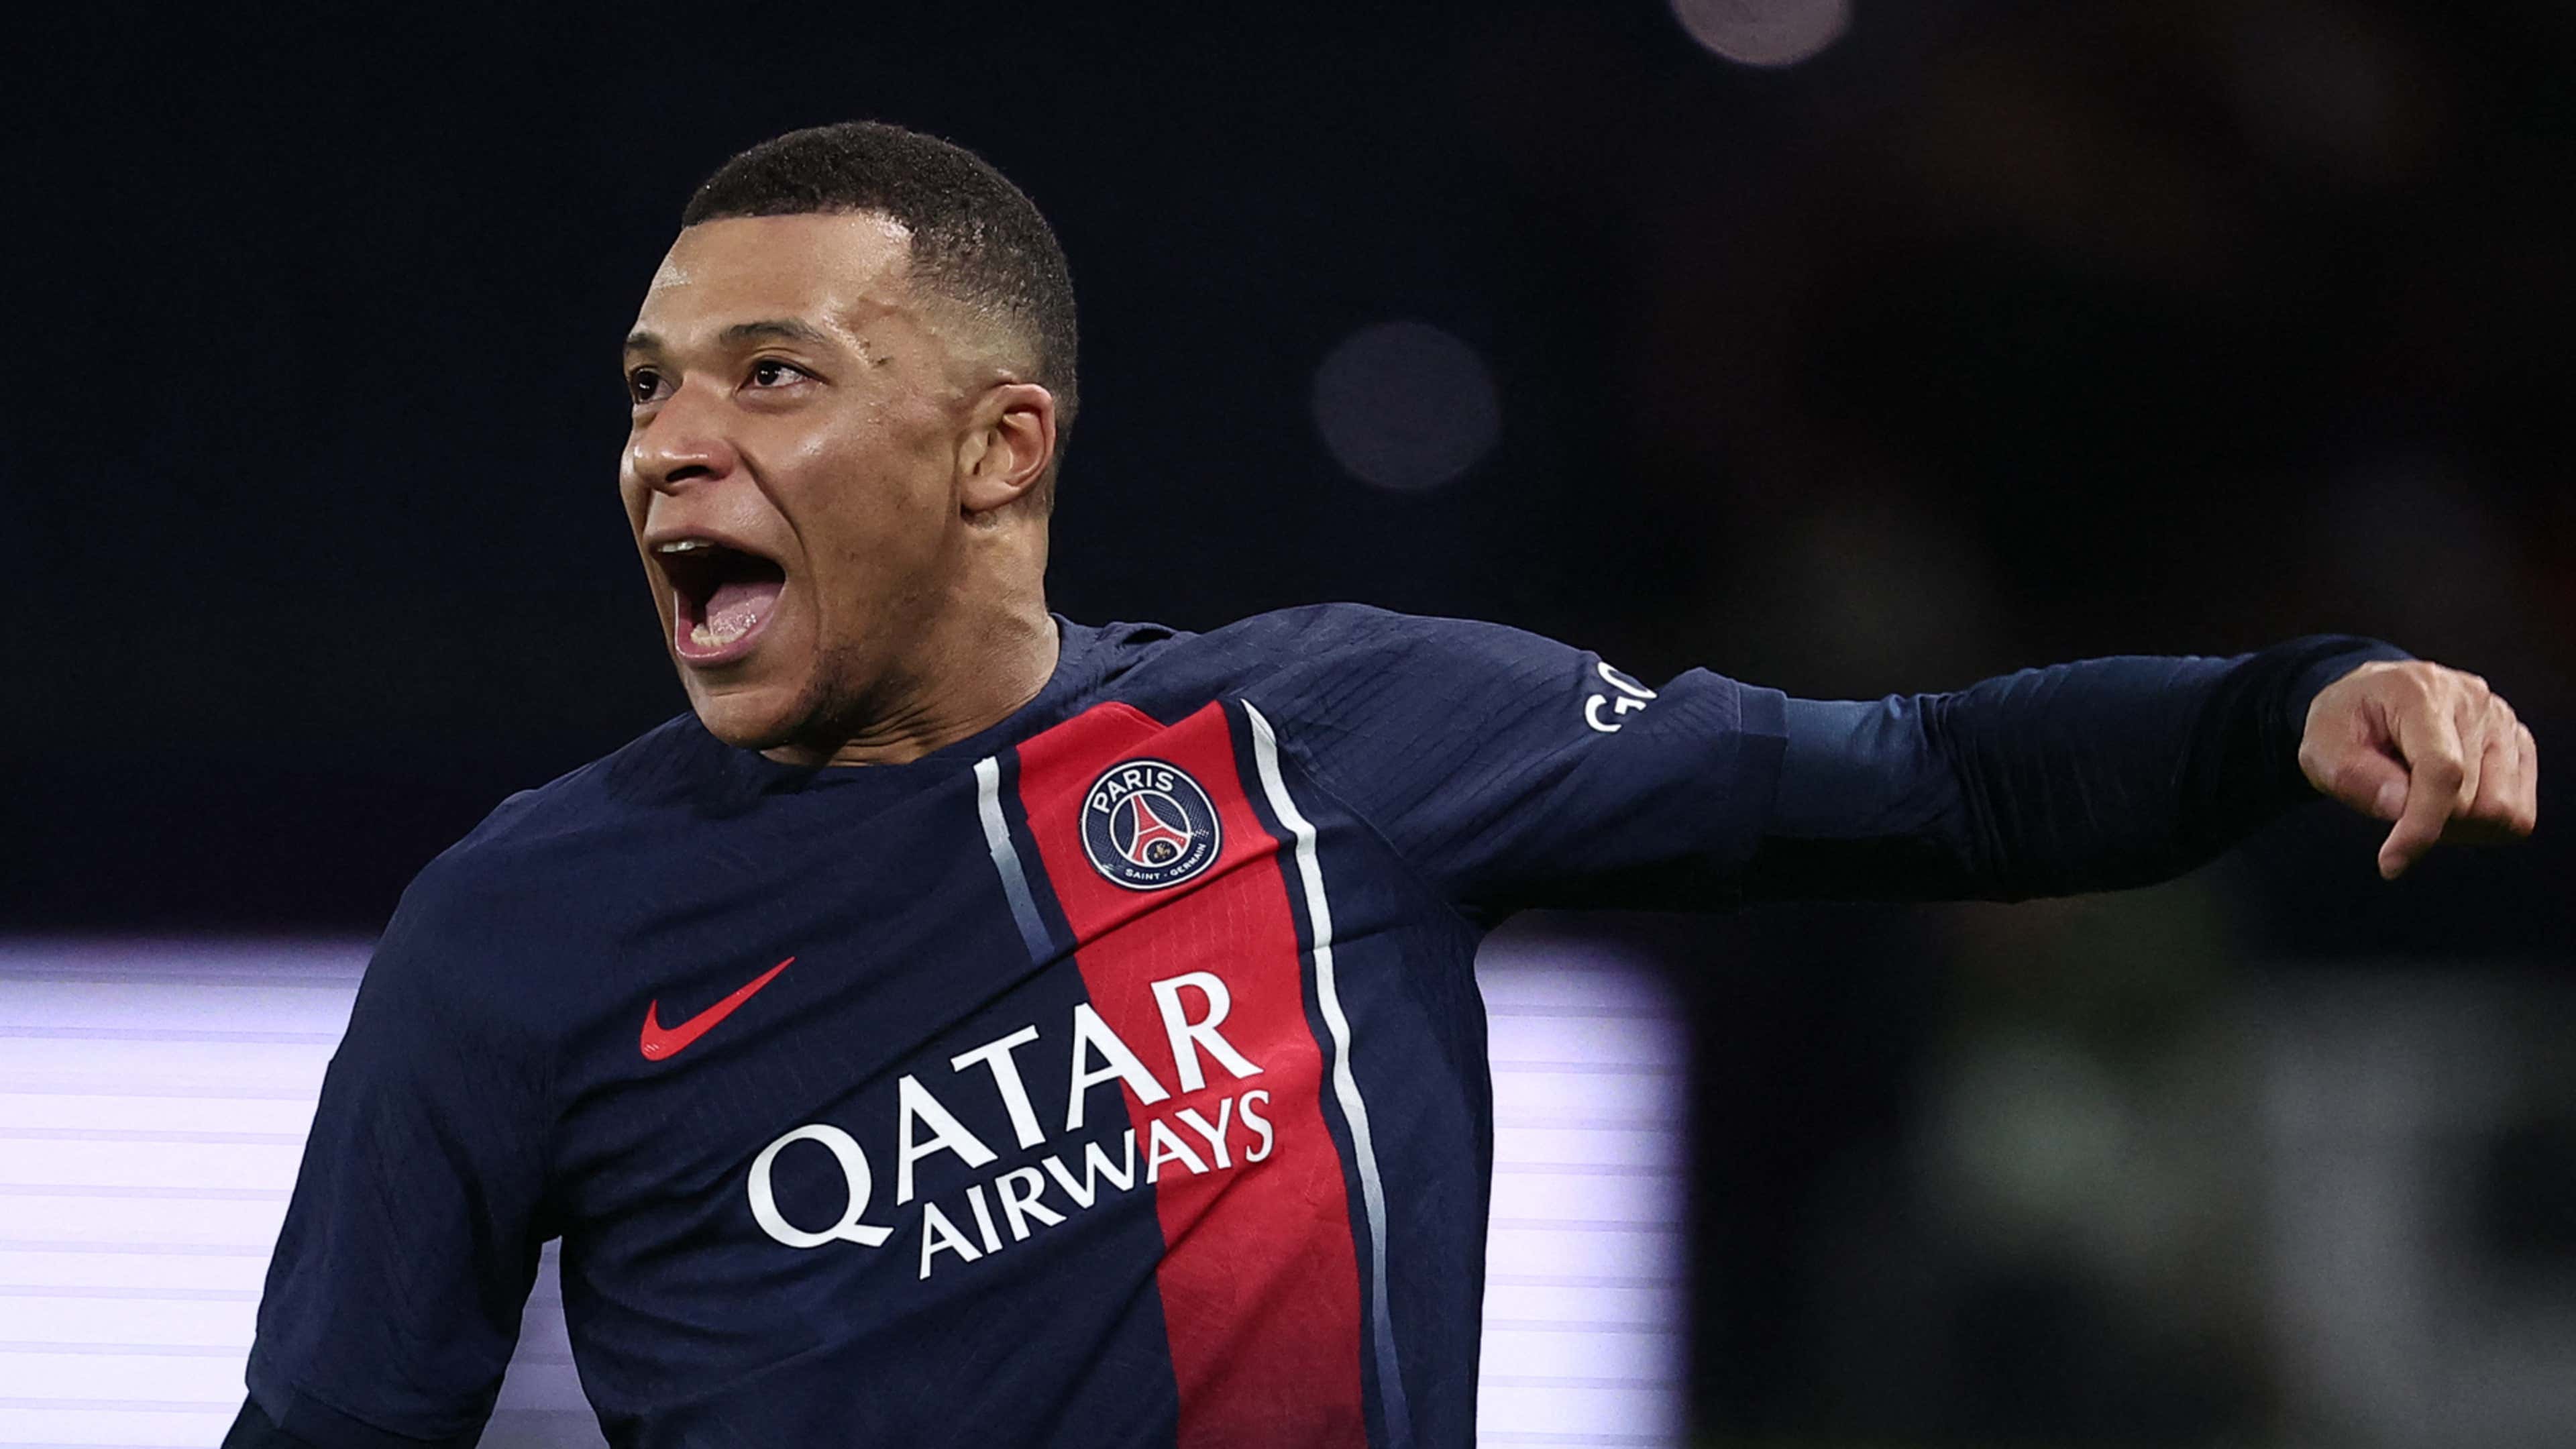 He's served his time at PSG' - Kylian Mbappe told to show